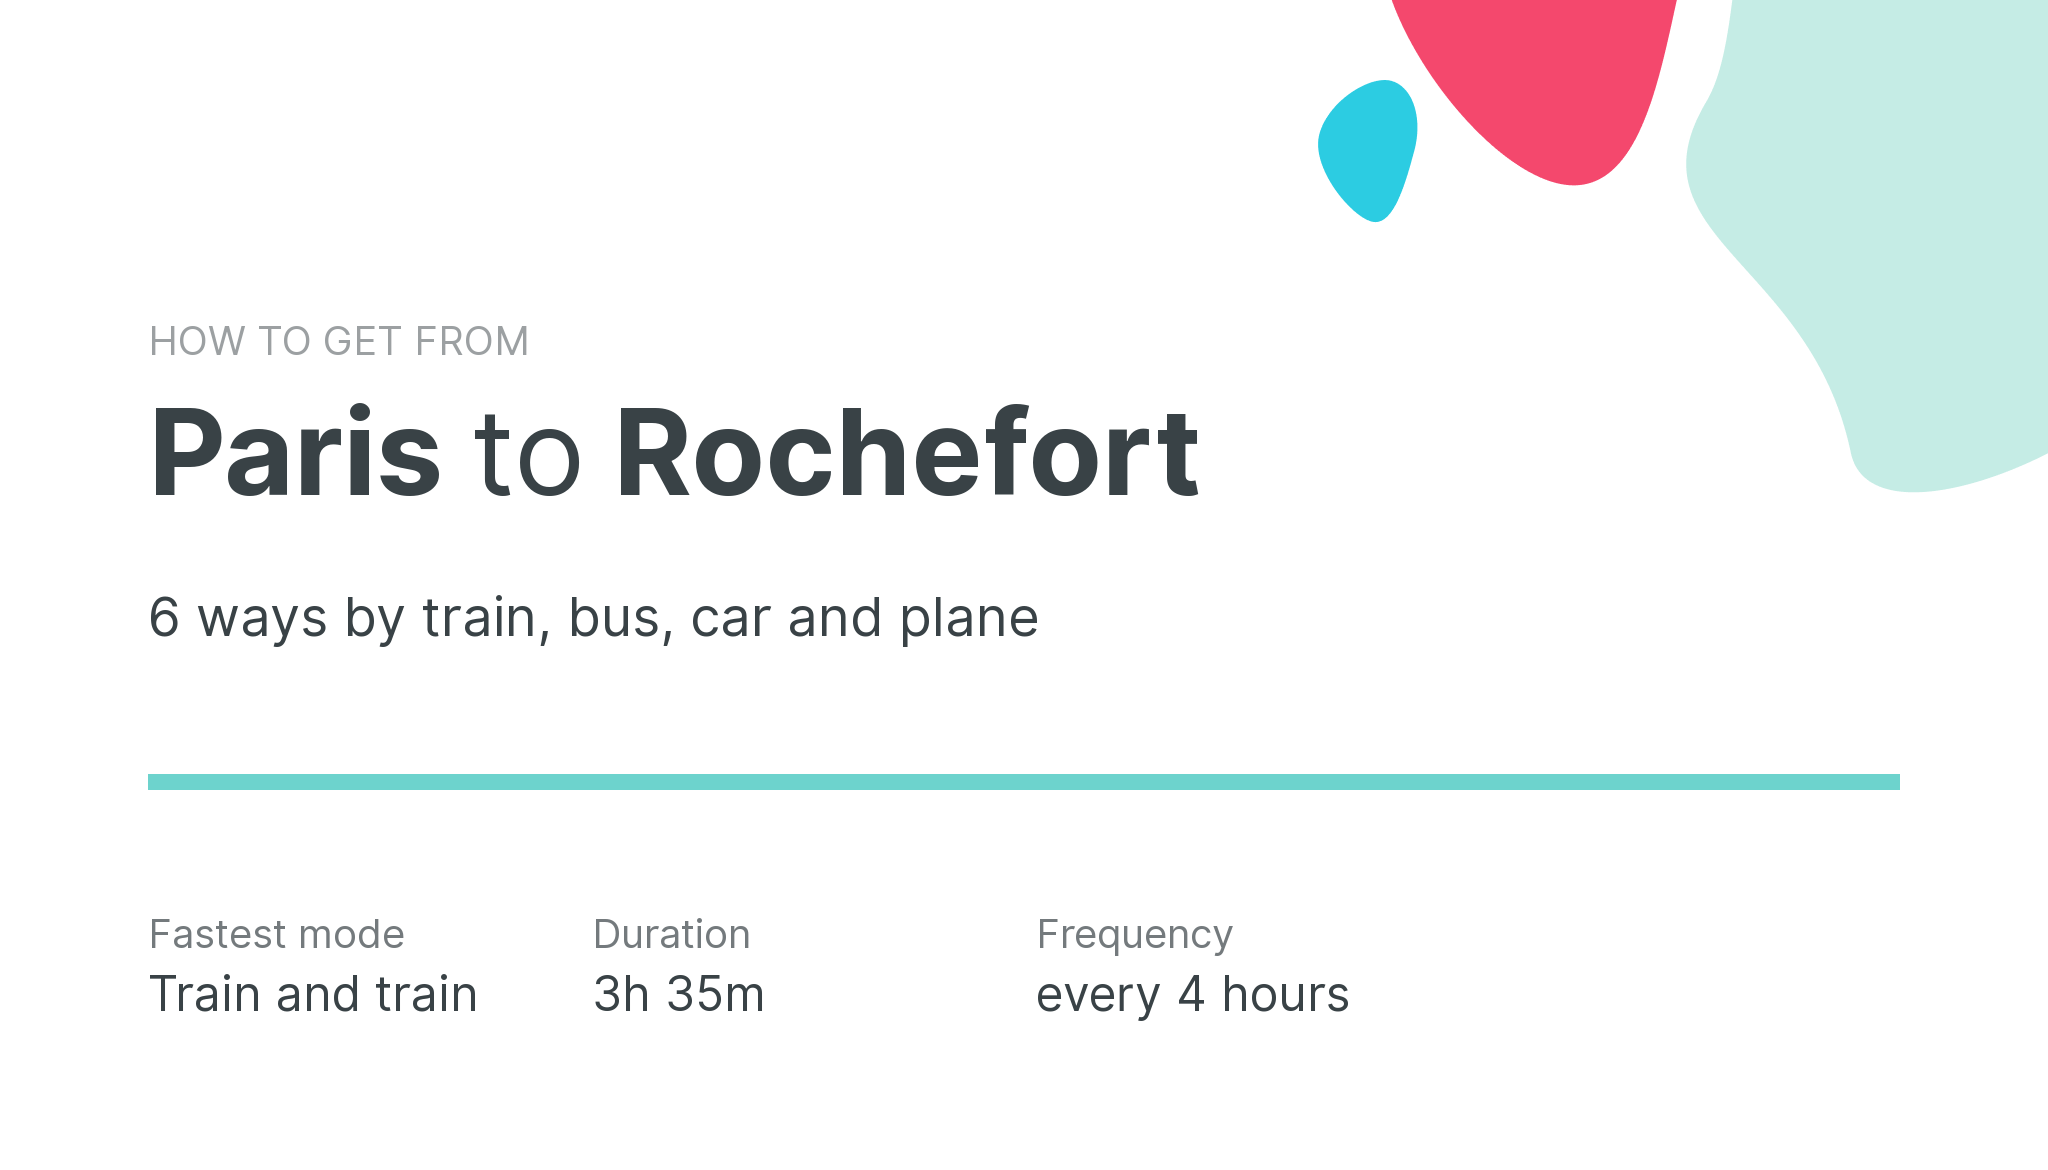 How do I get from Paris to Rochefort